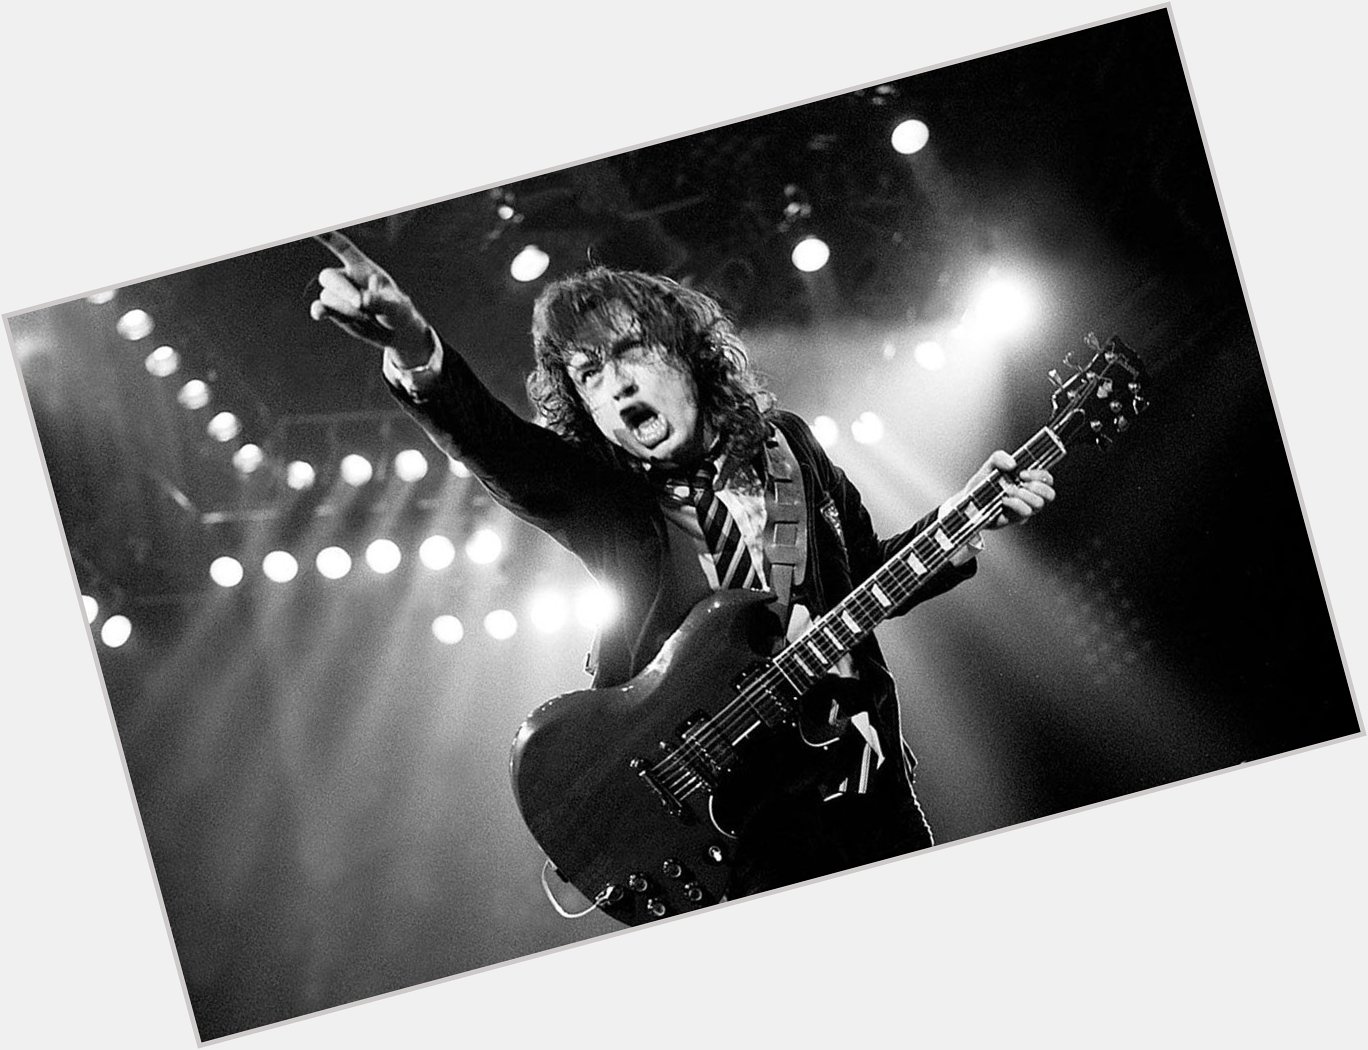 Happy Birthday Angus Young, the lead guitarist! 